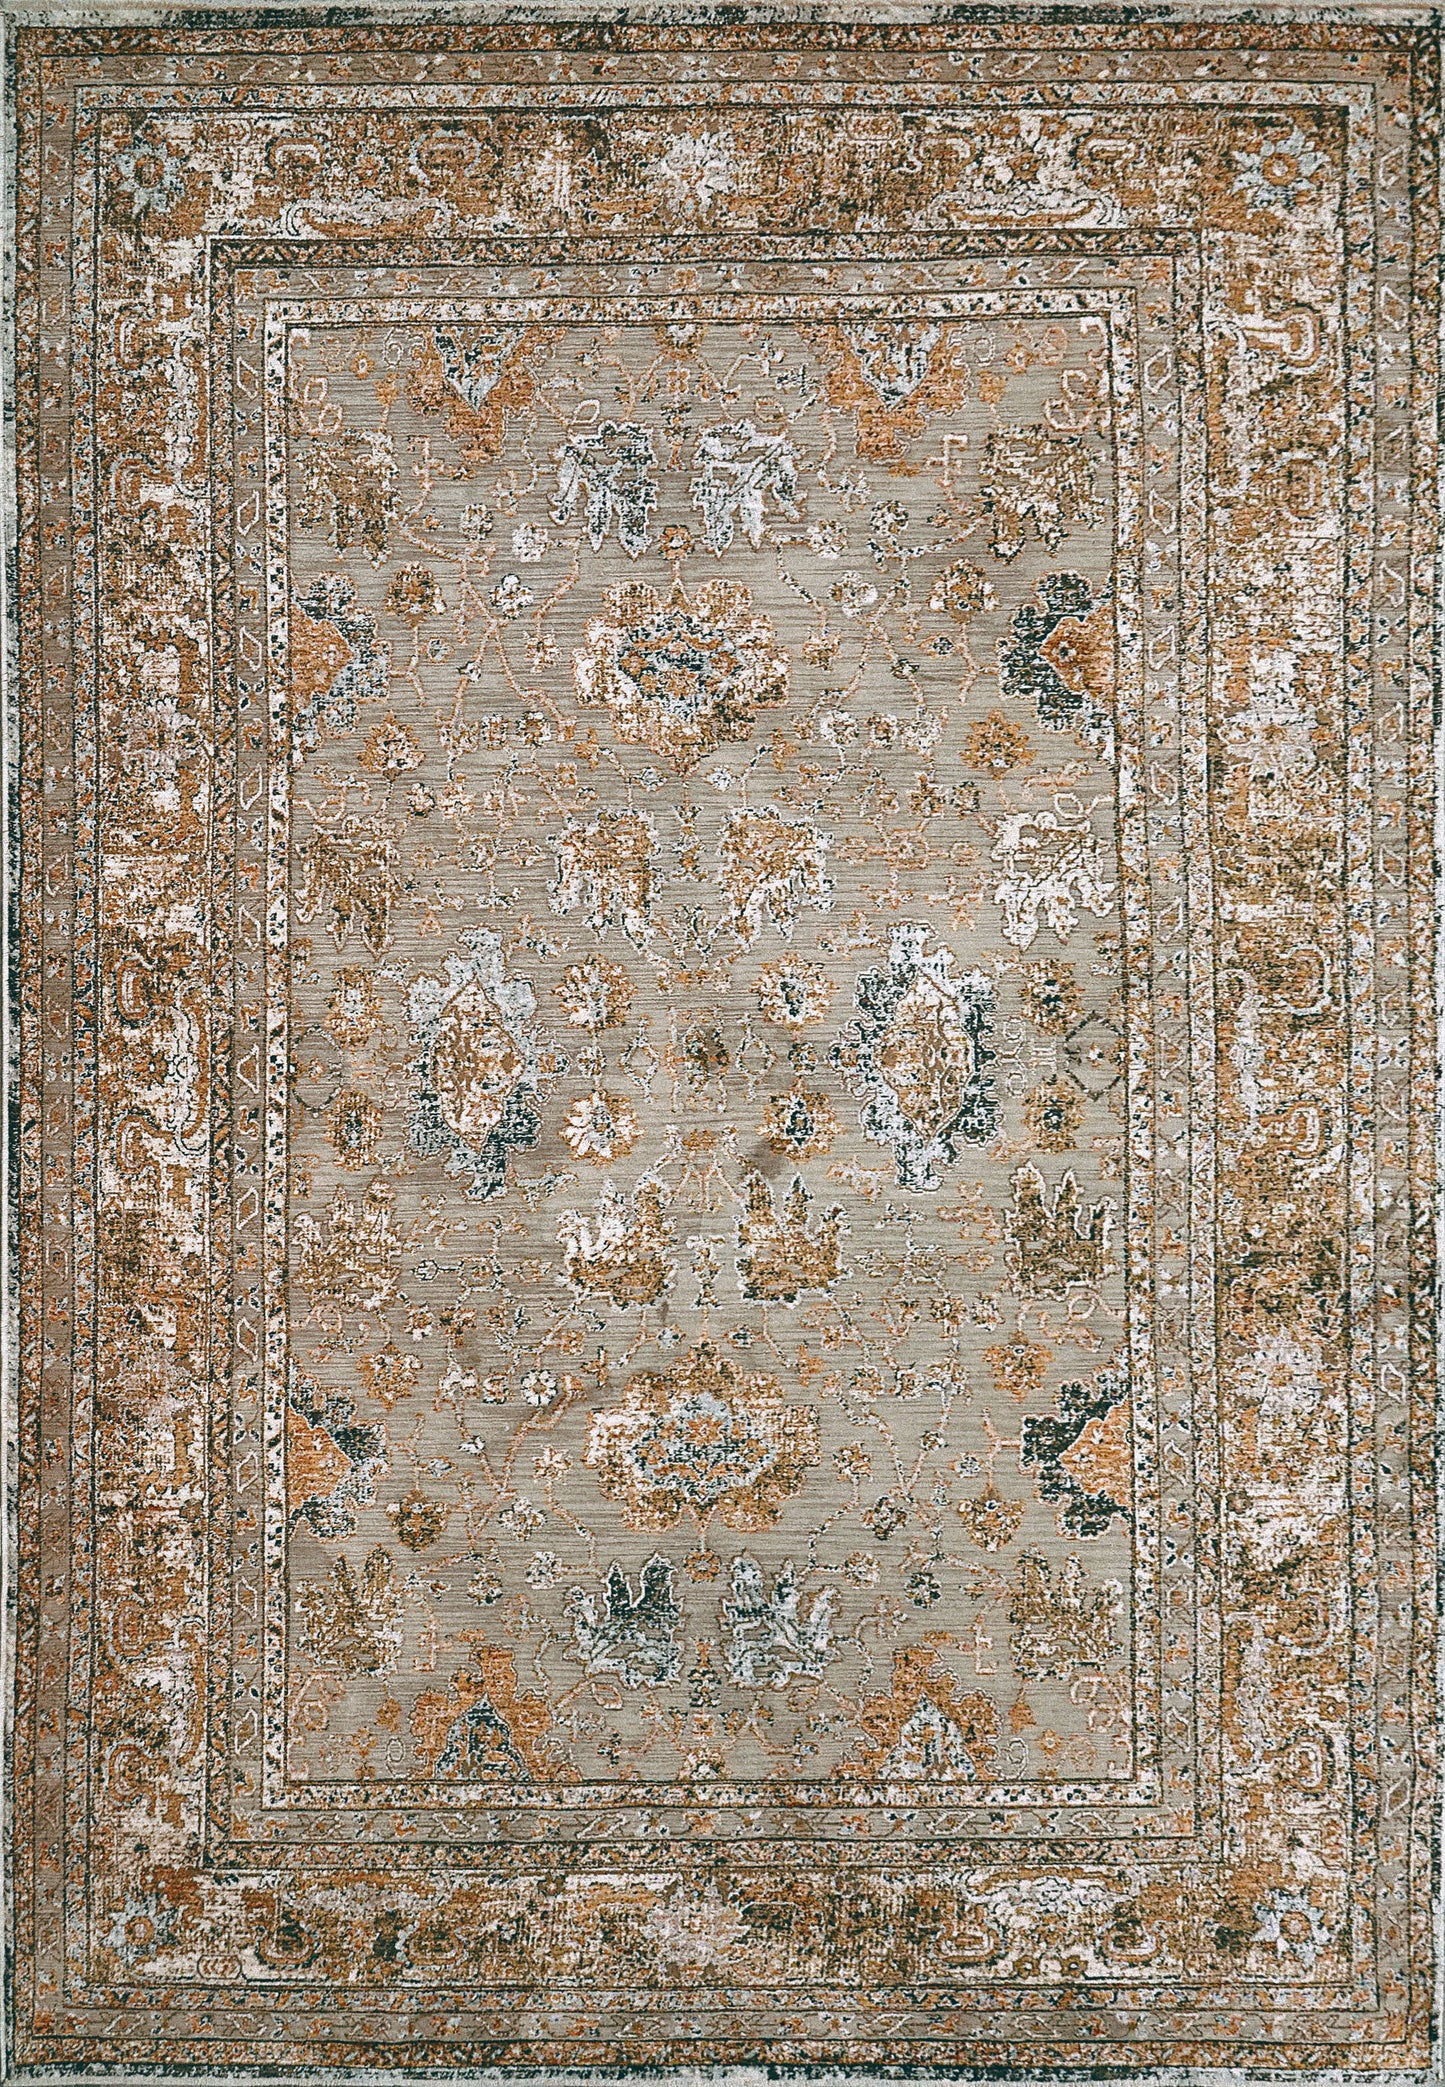 Cullen 5701-800 Taupe/Brown Area Rug